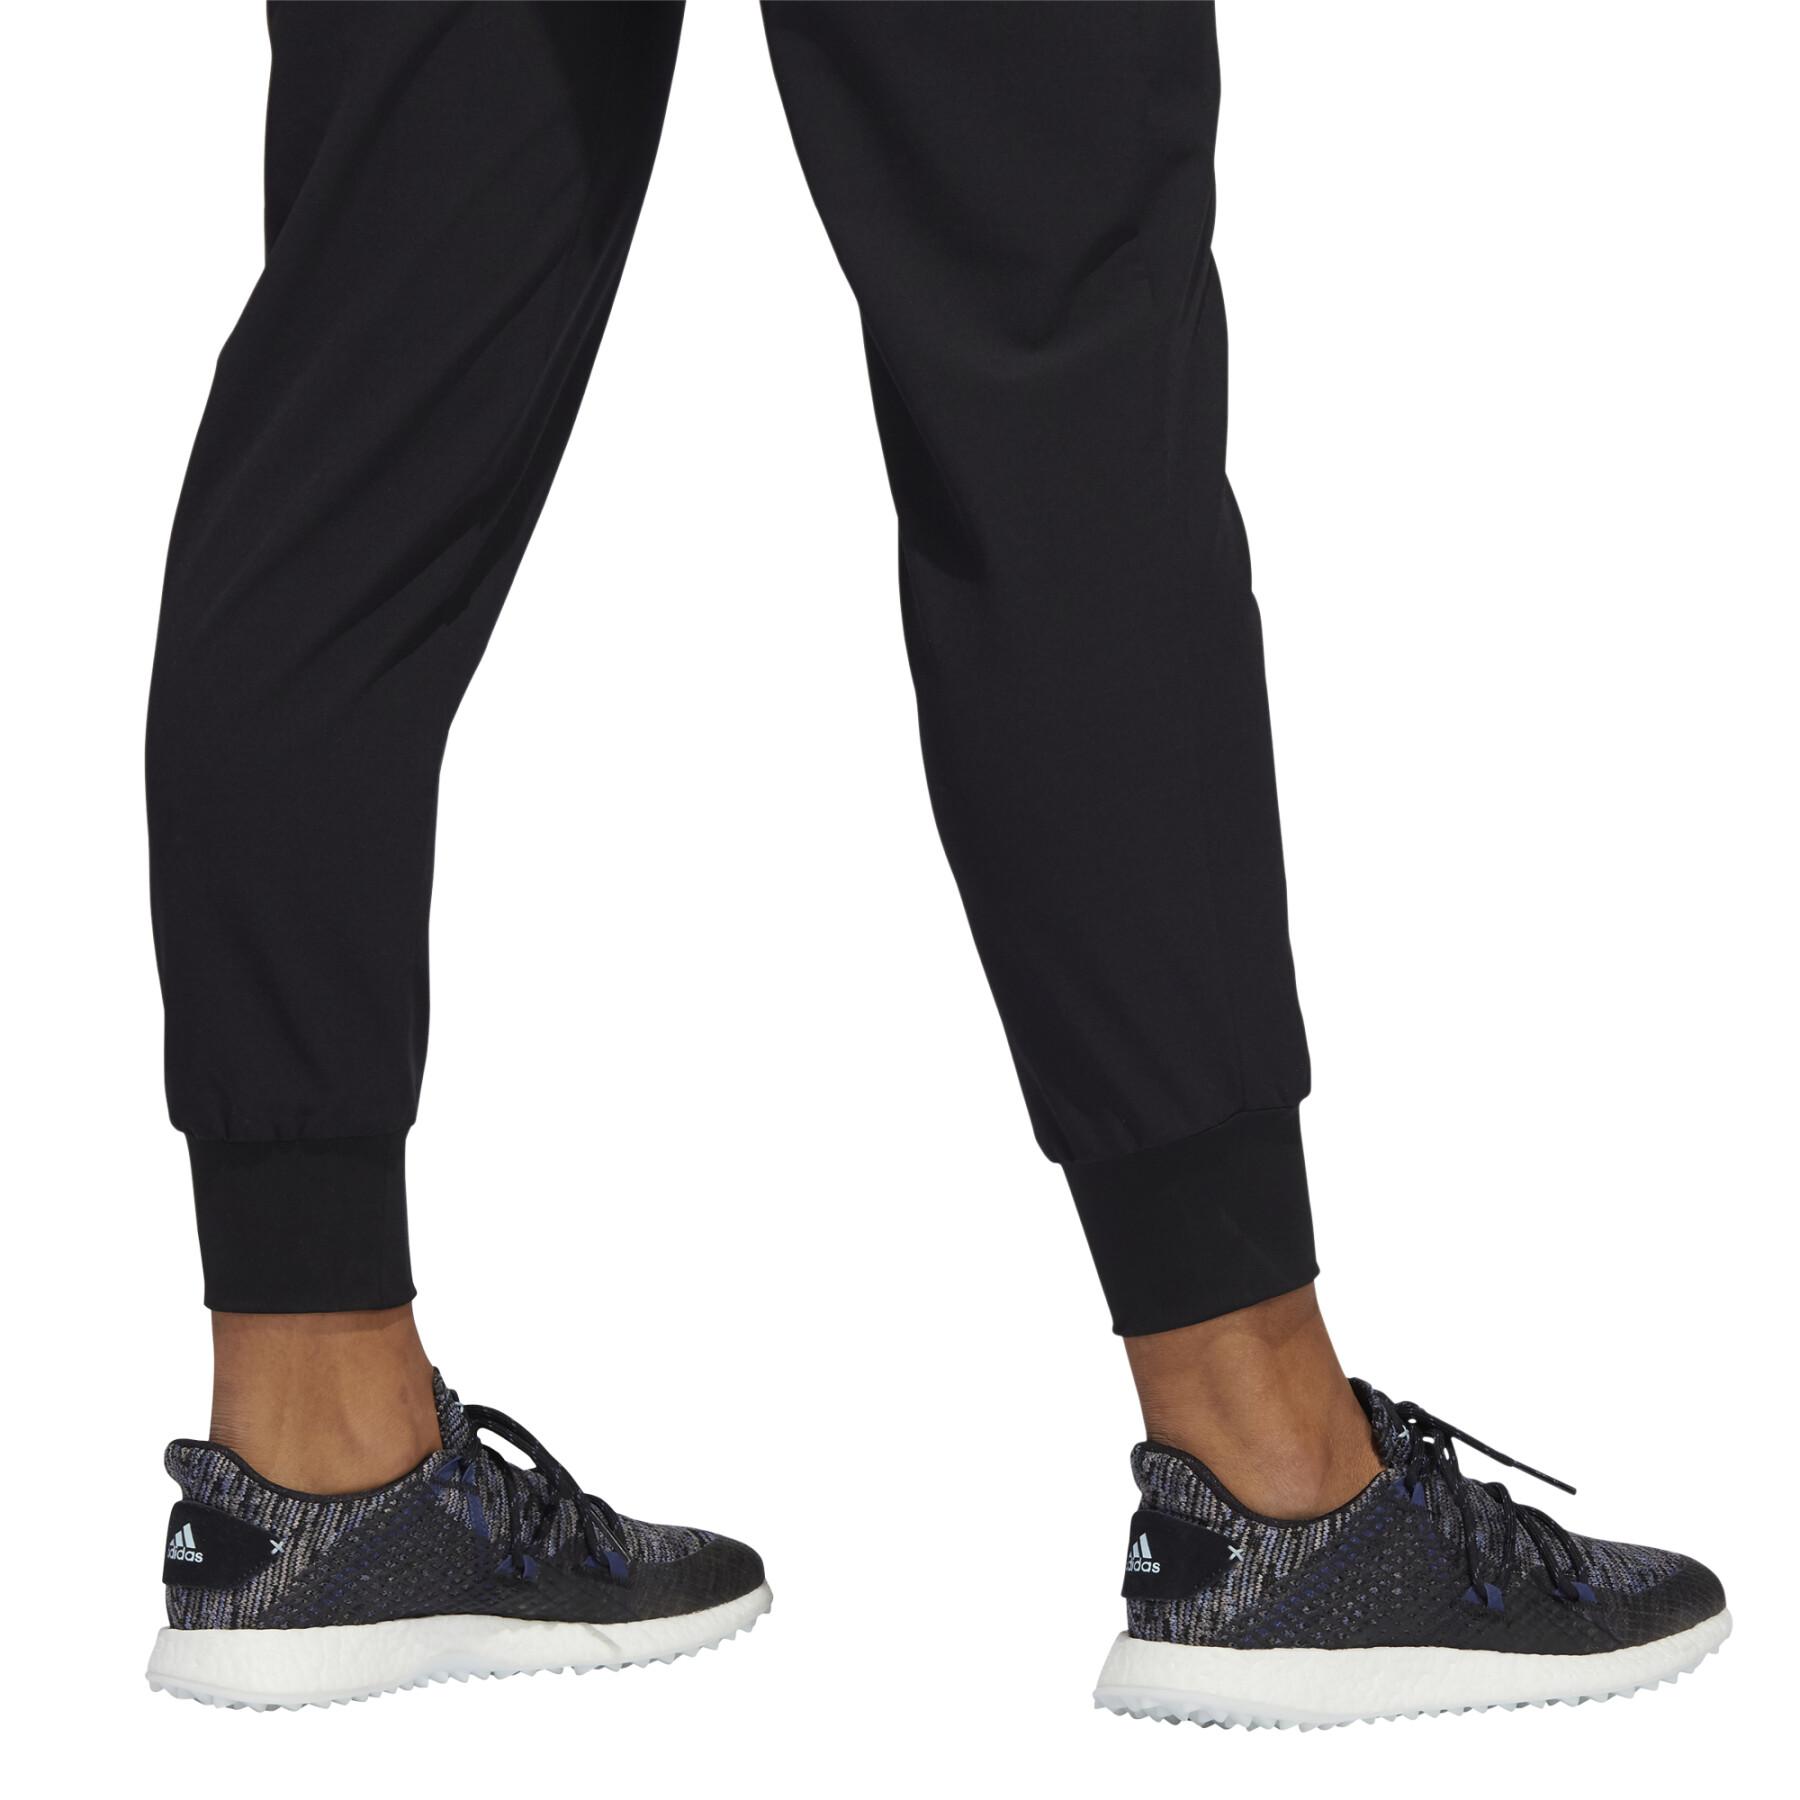 Women's trousers adidas Stretch Jogger